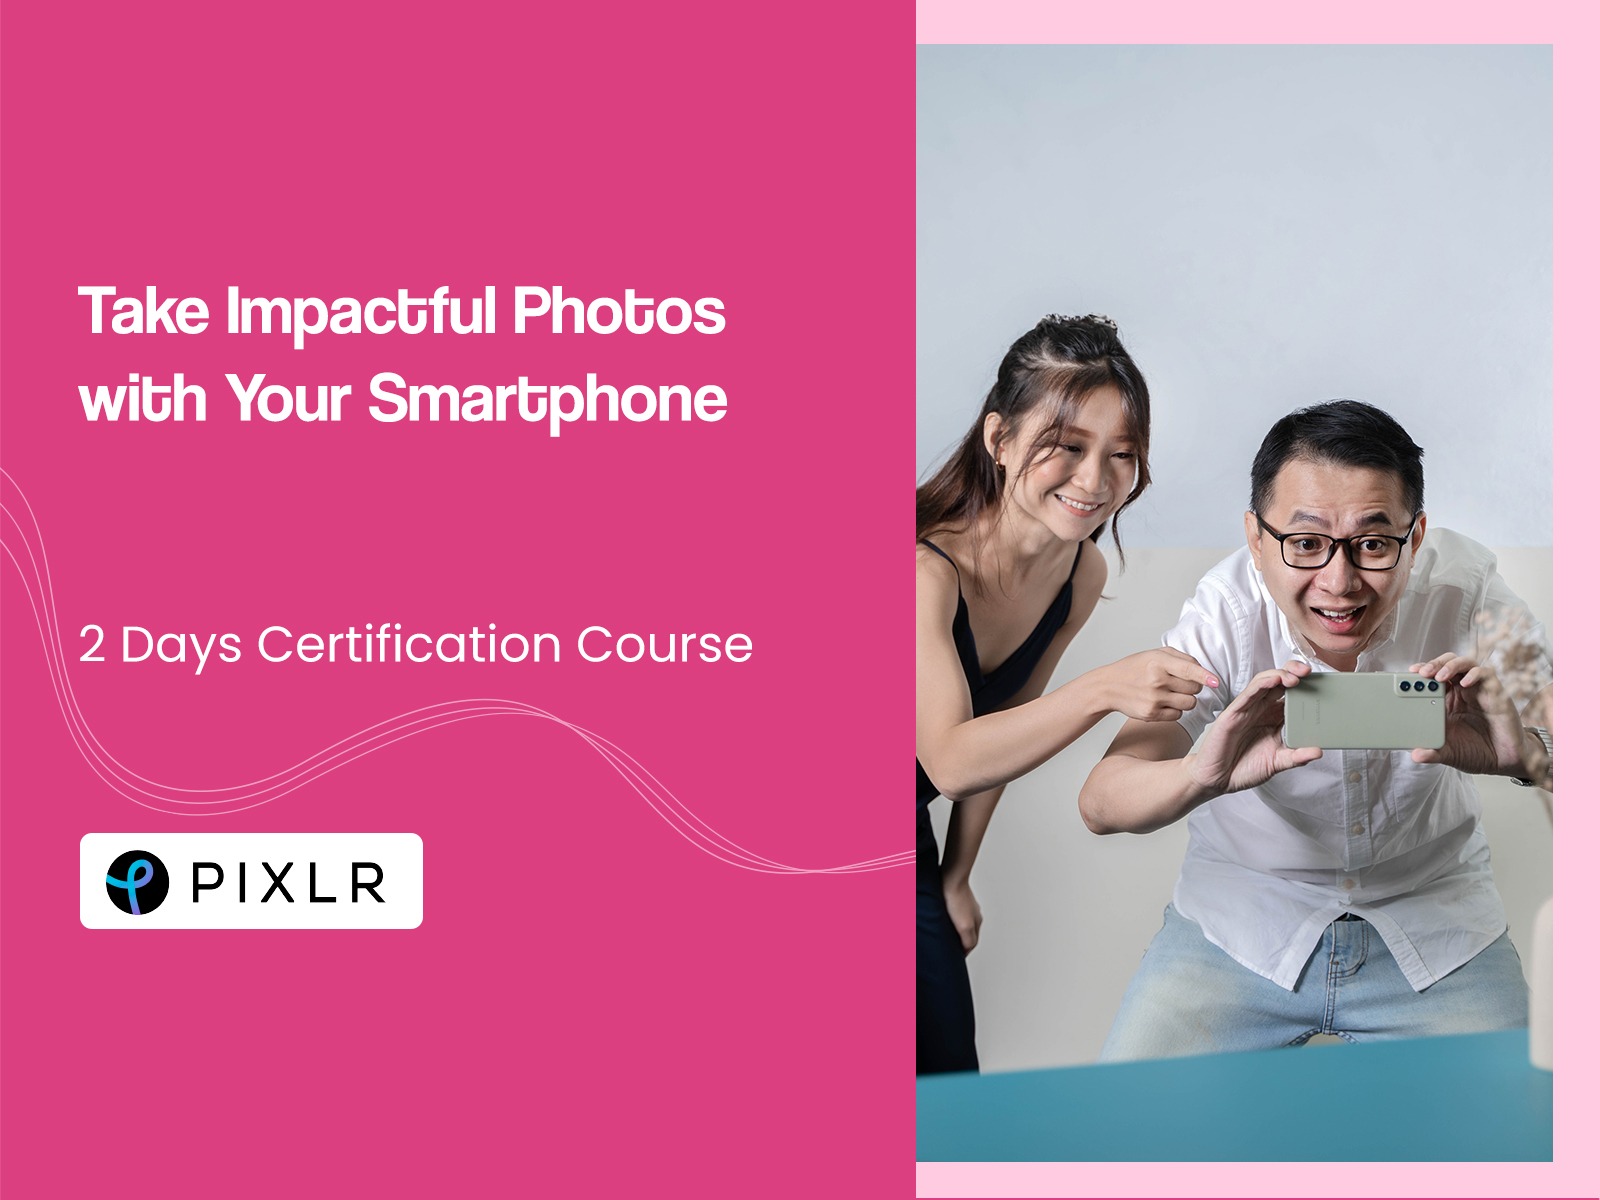 Take Impactful Photos with Your Smartphone course in Singapore